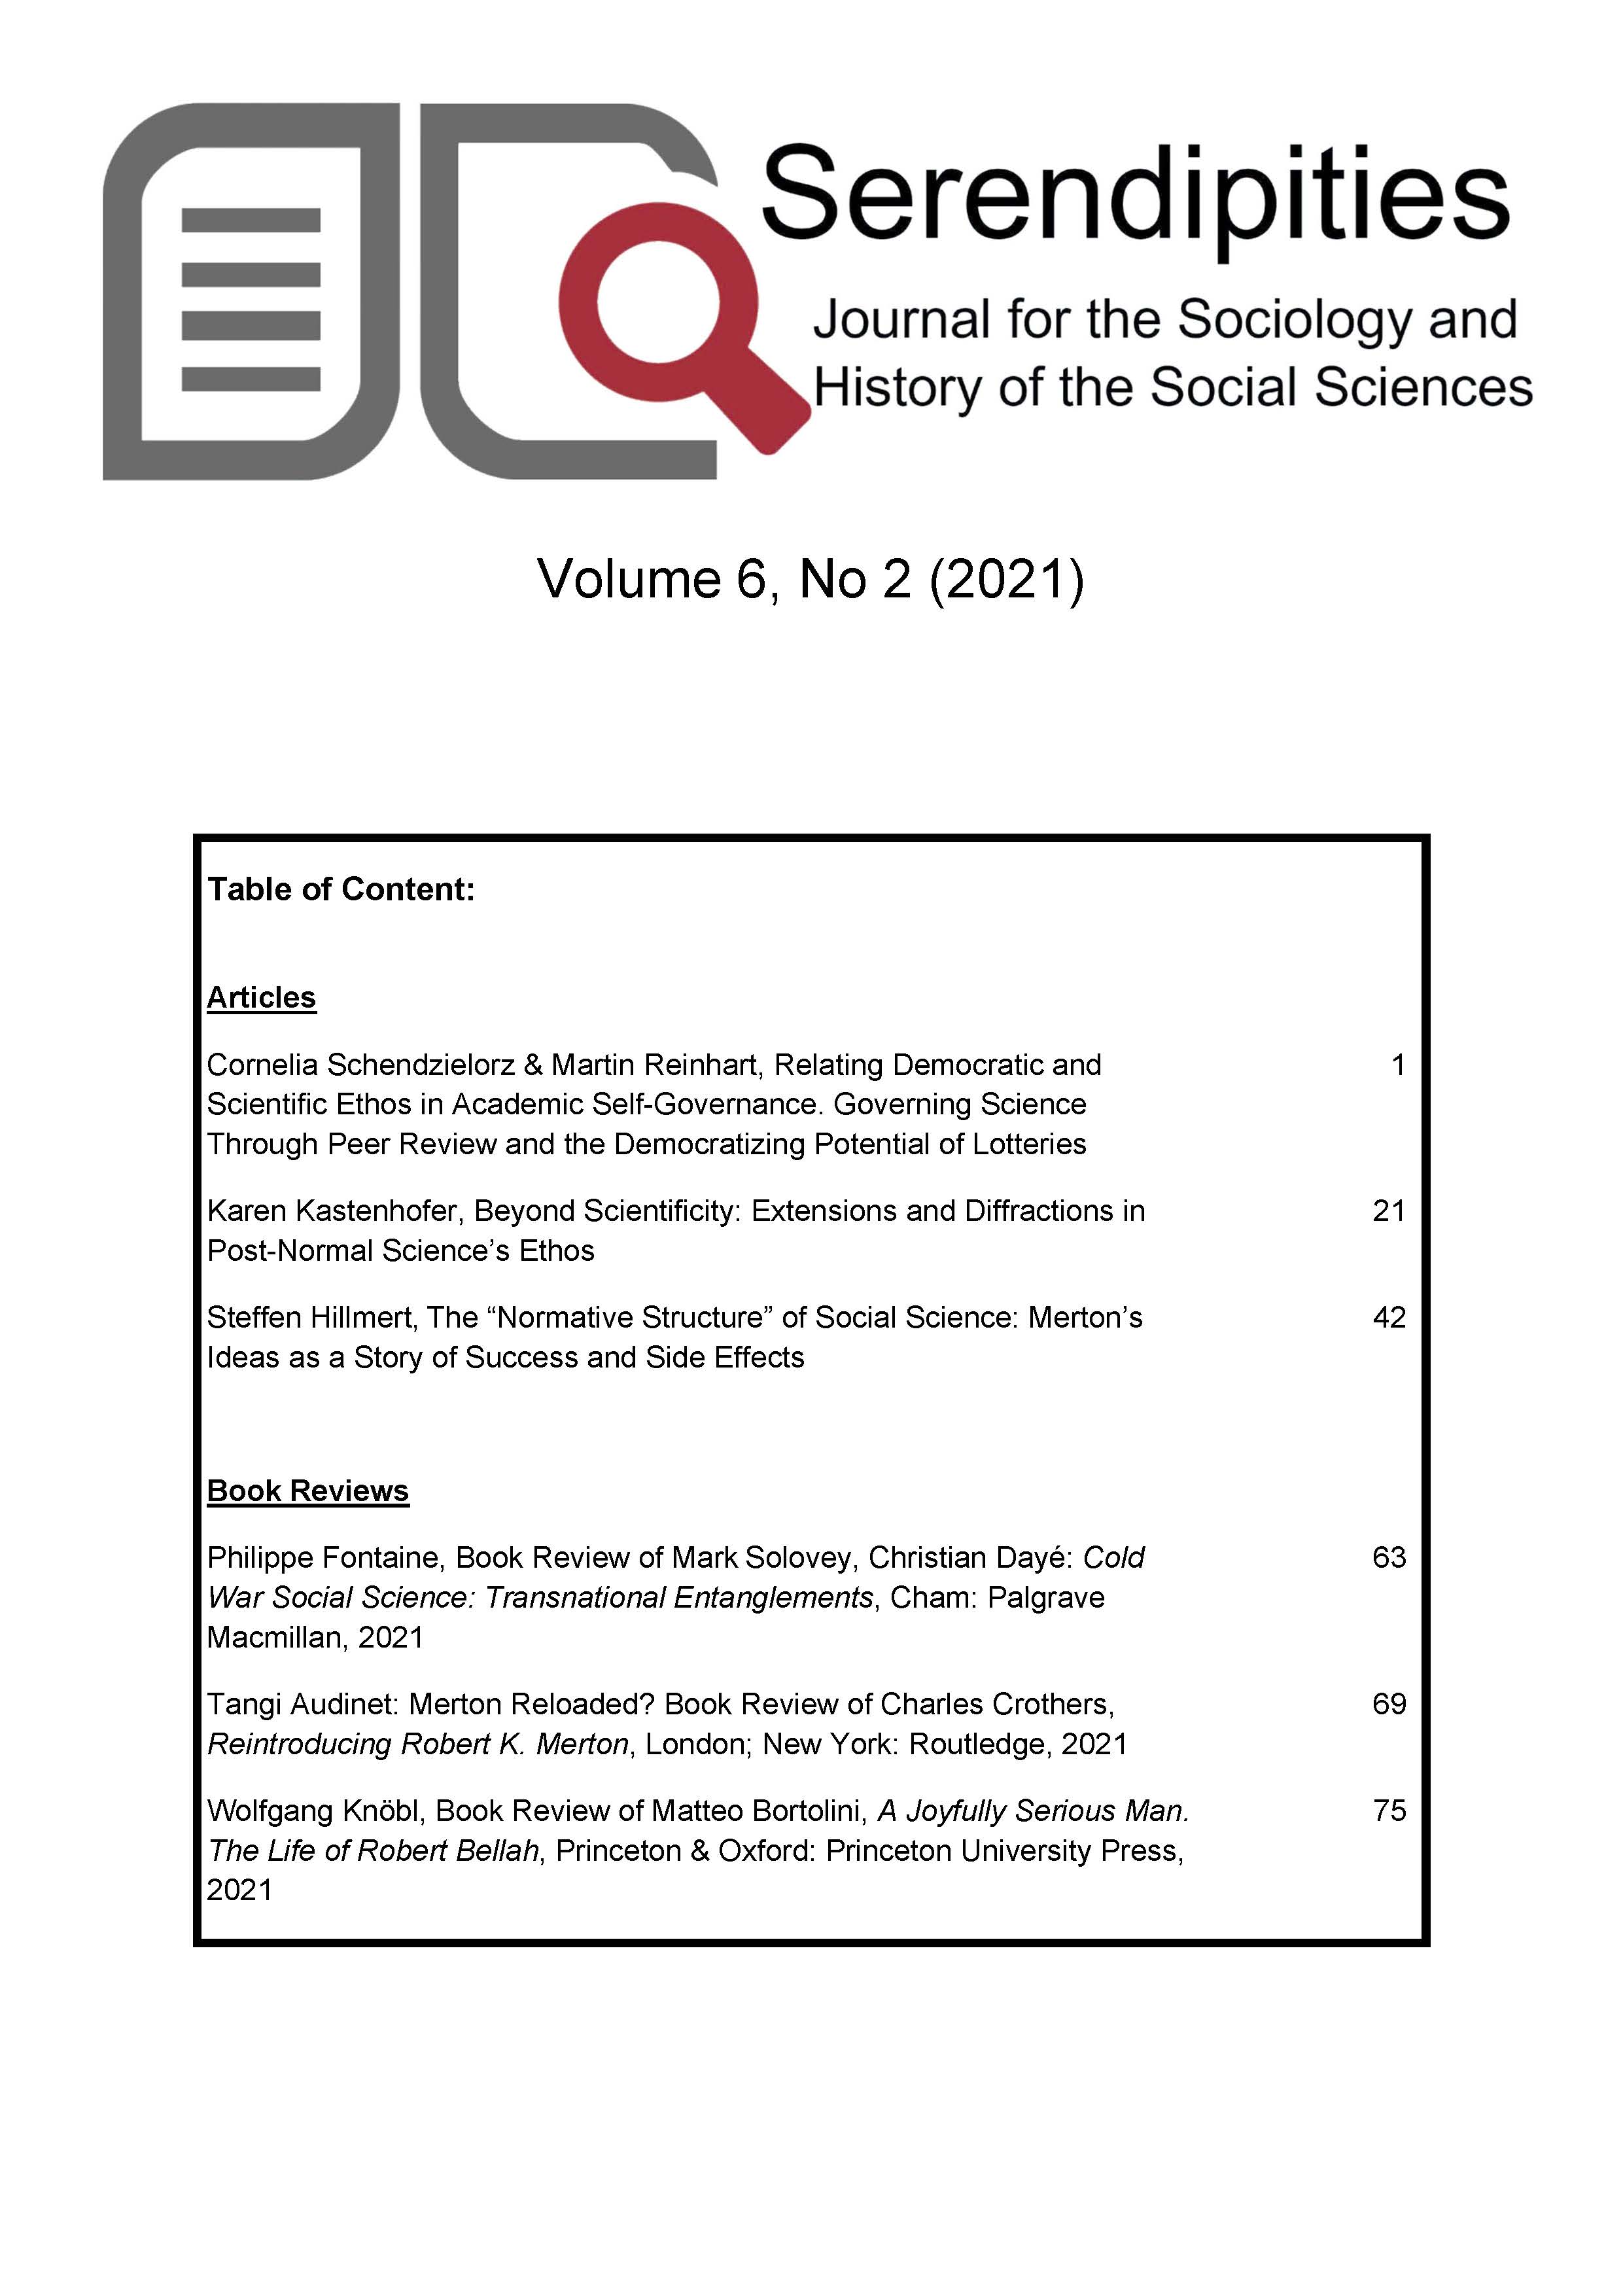 					View Vol. 6 No. 2 (2021): Serendipities. Journal for the Sociology and History of the Social Sciences
				